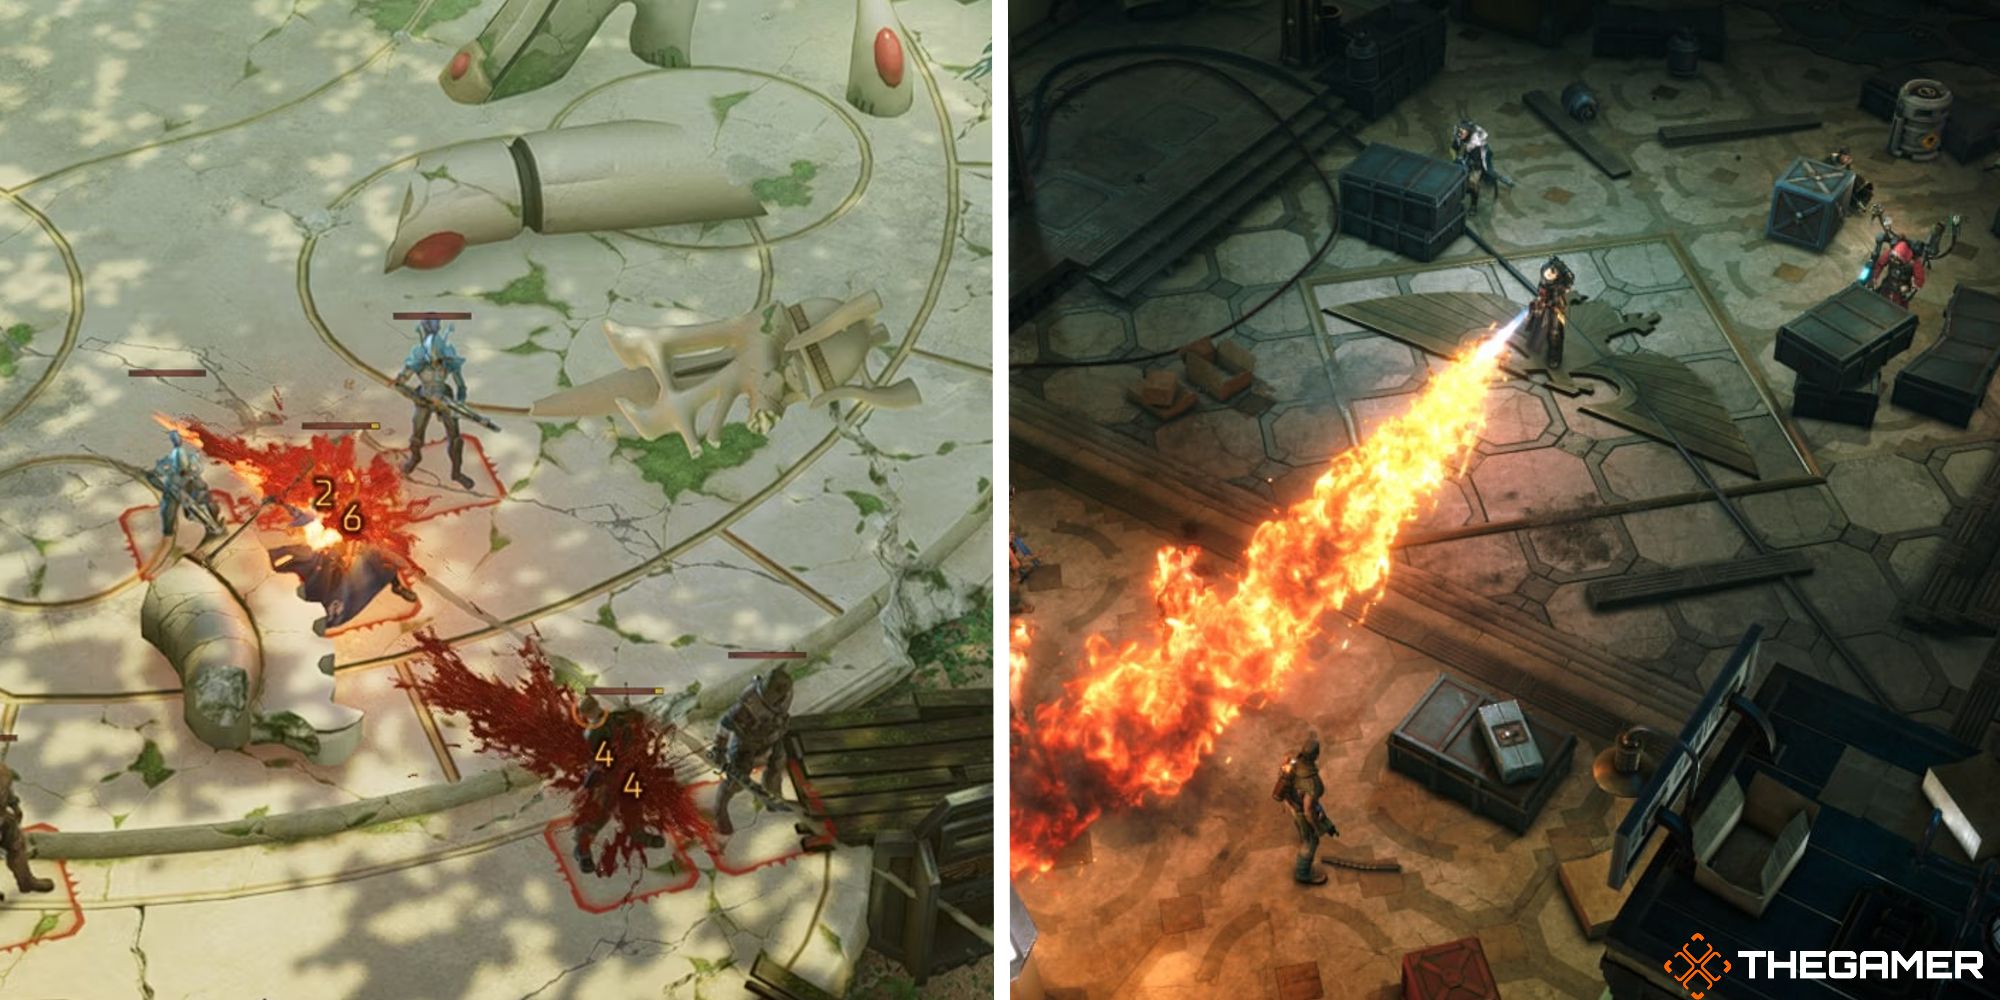 split image showing enemies taking damage next to image of party member using a flame thrower